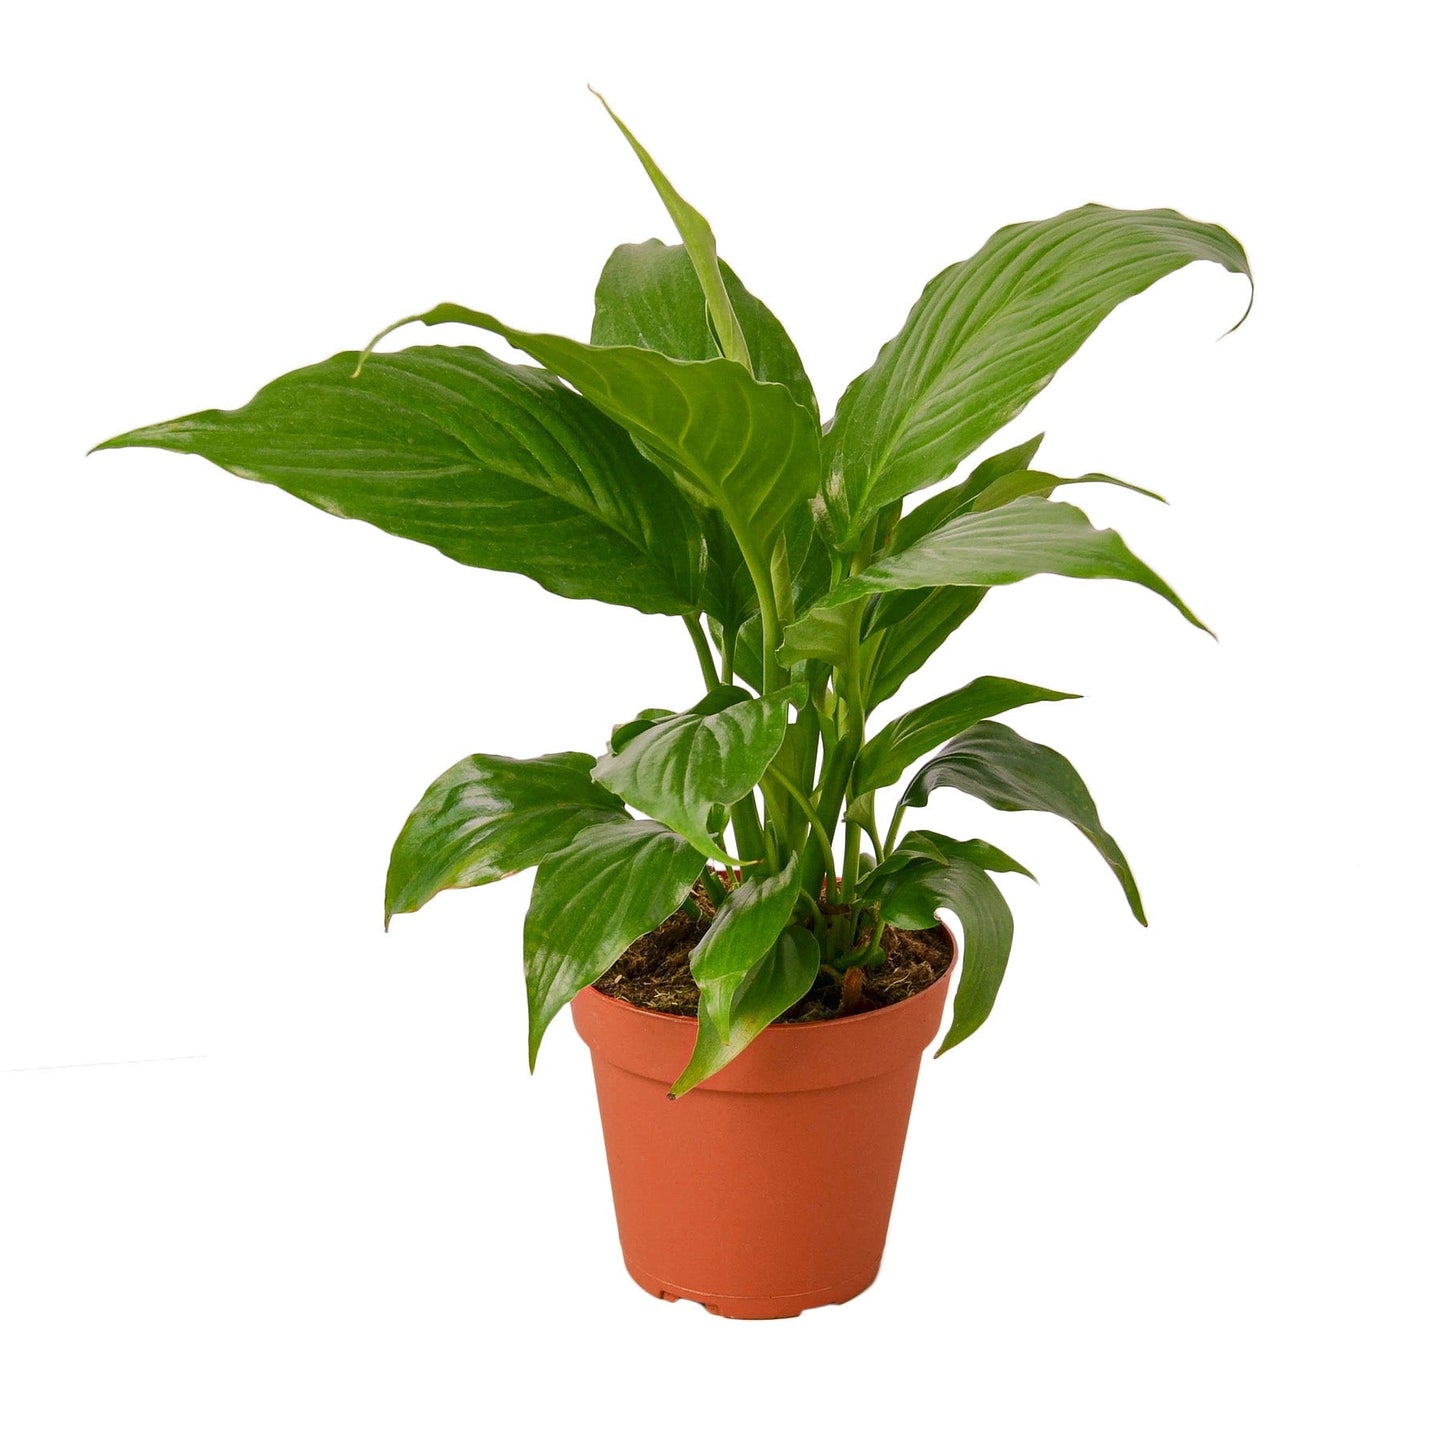 Spathiphyllum 'Peace Lily' - 4" Pot - NURSERY POT ONLY - One Beleaf Away Plant Studio